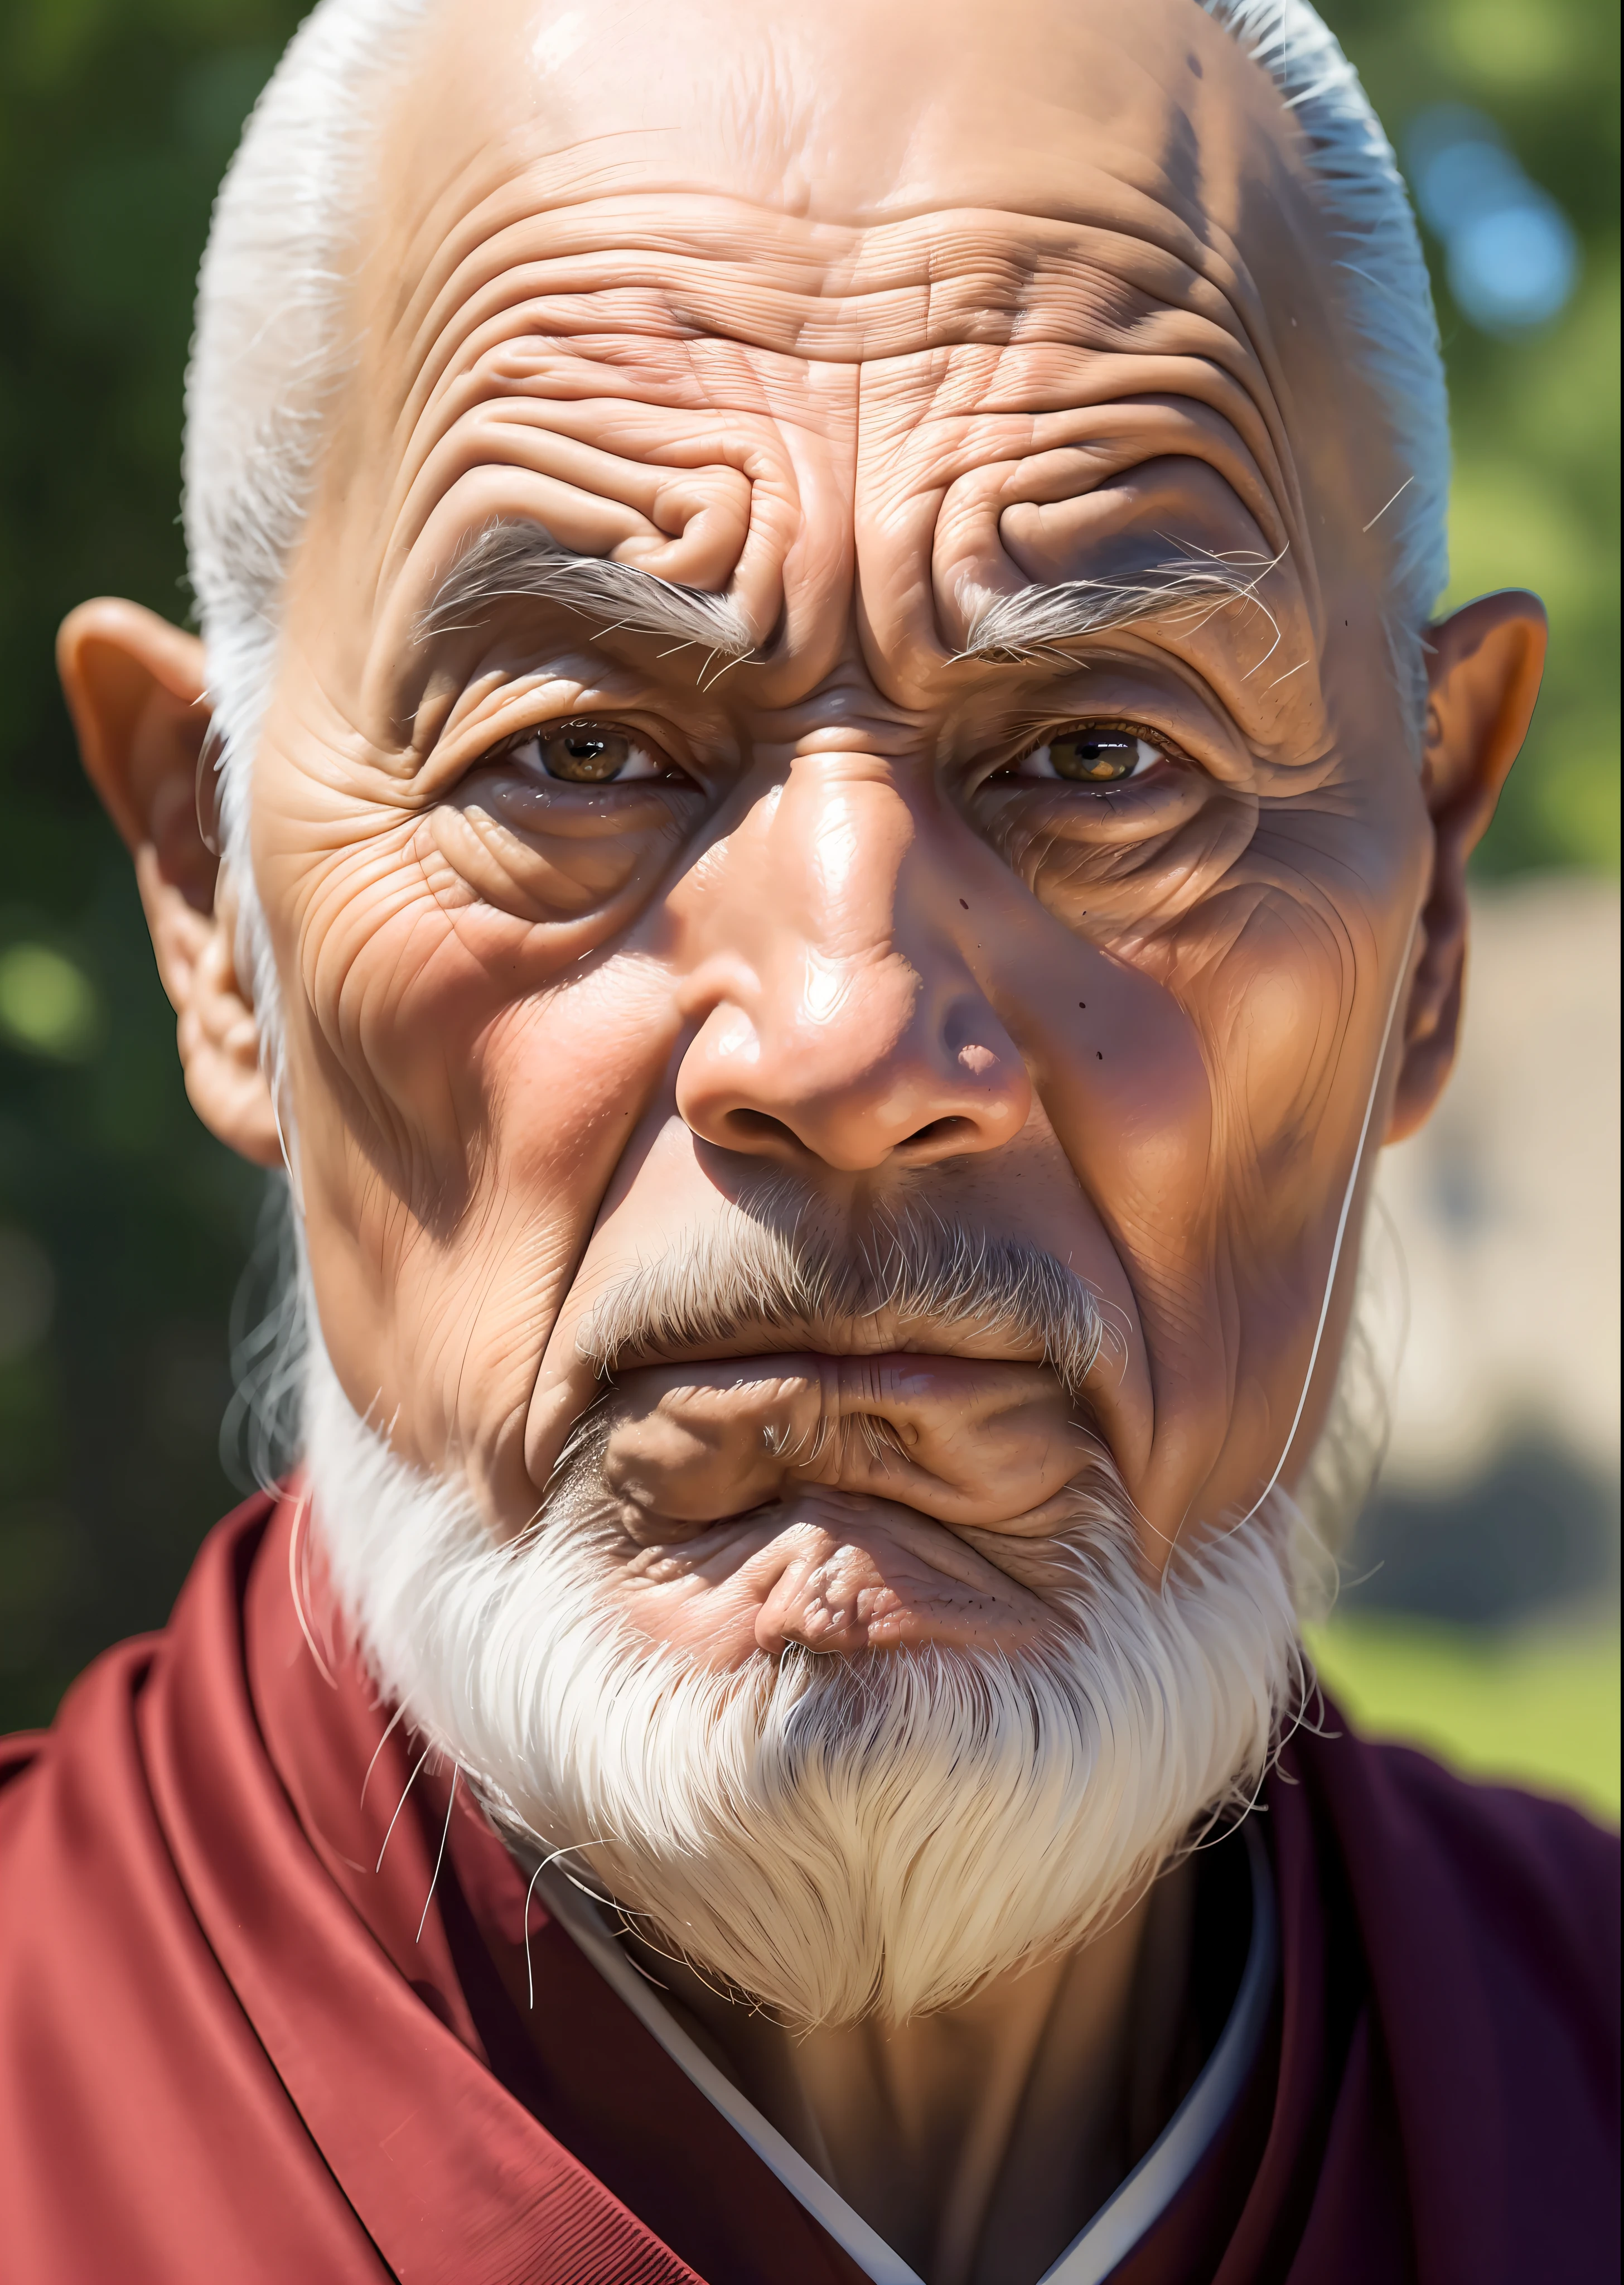 A wise face of an elderly monk, with deep lines that tell stories of a life lived wisely, samurai gerreiro, conveying a sense of tranquility and mystery